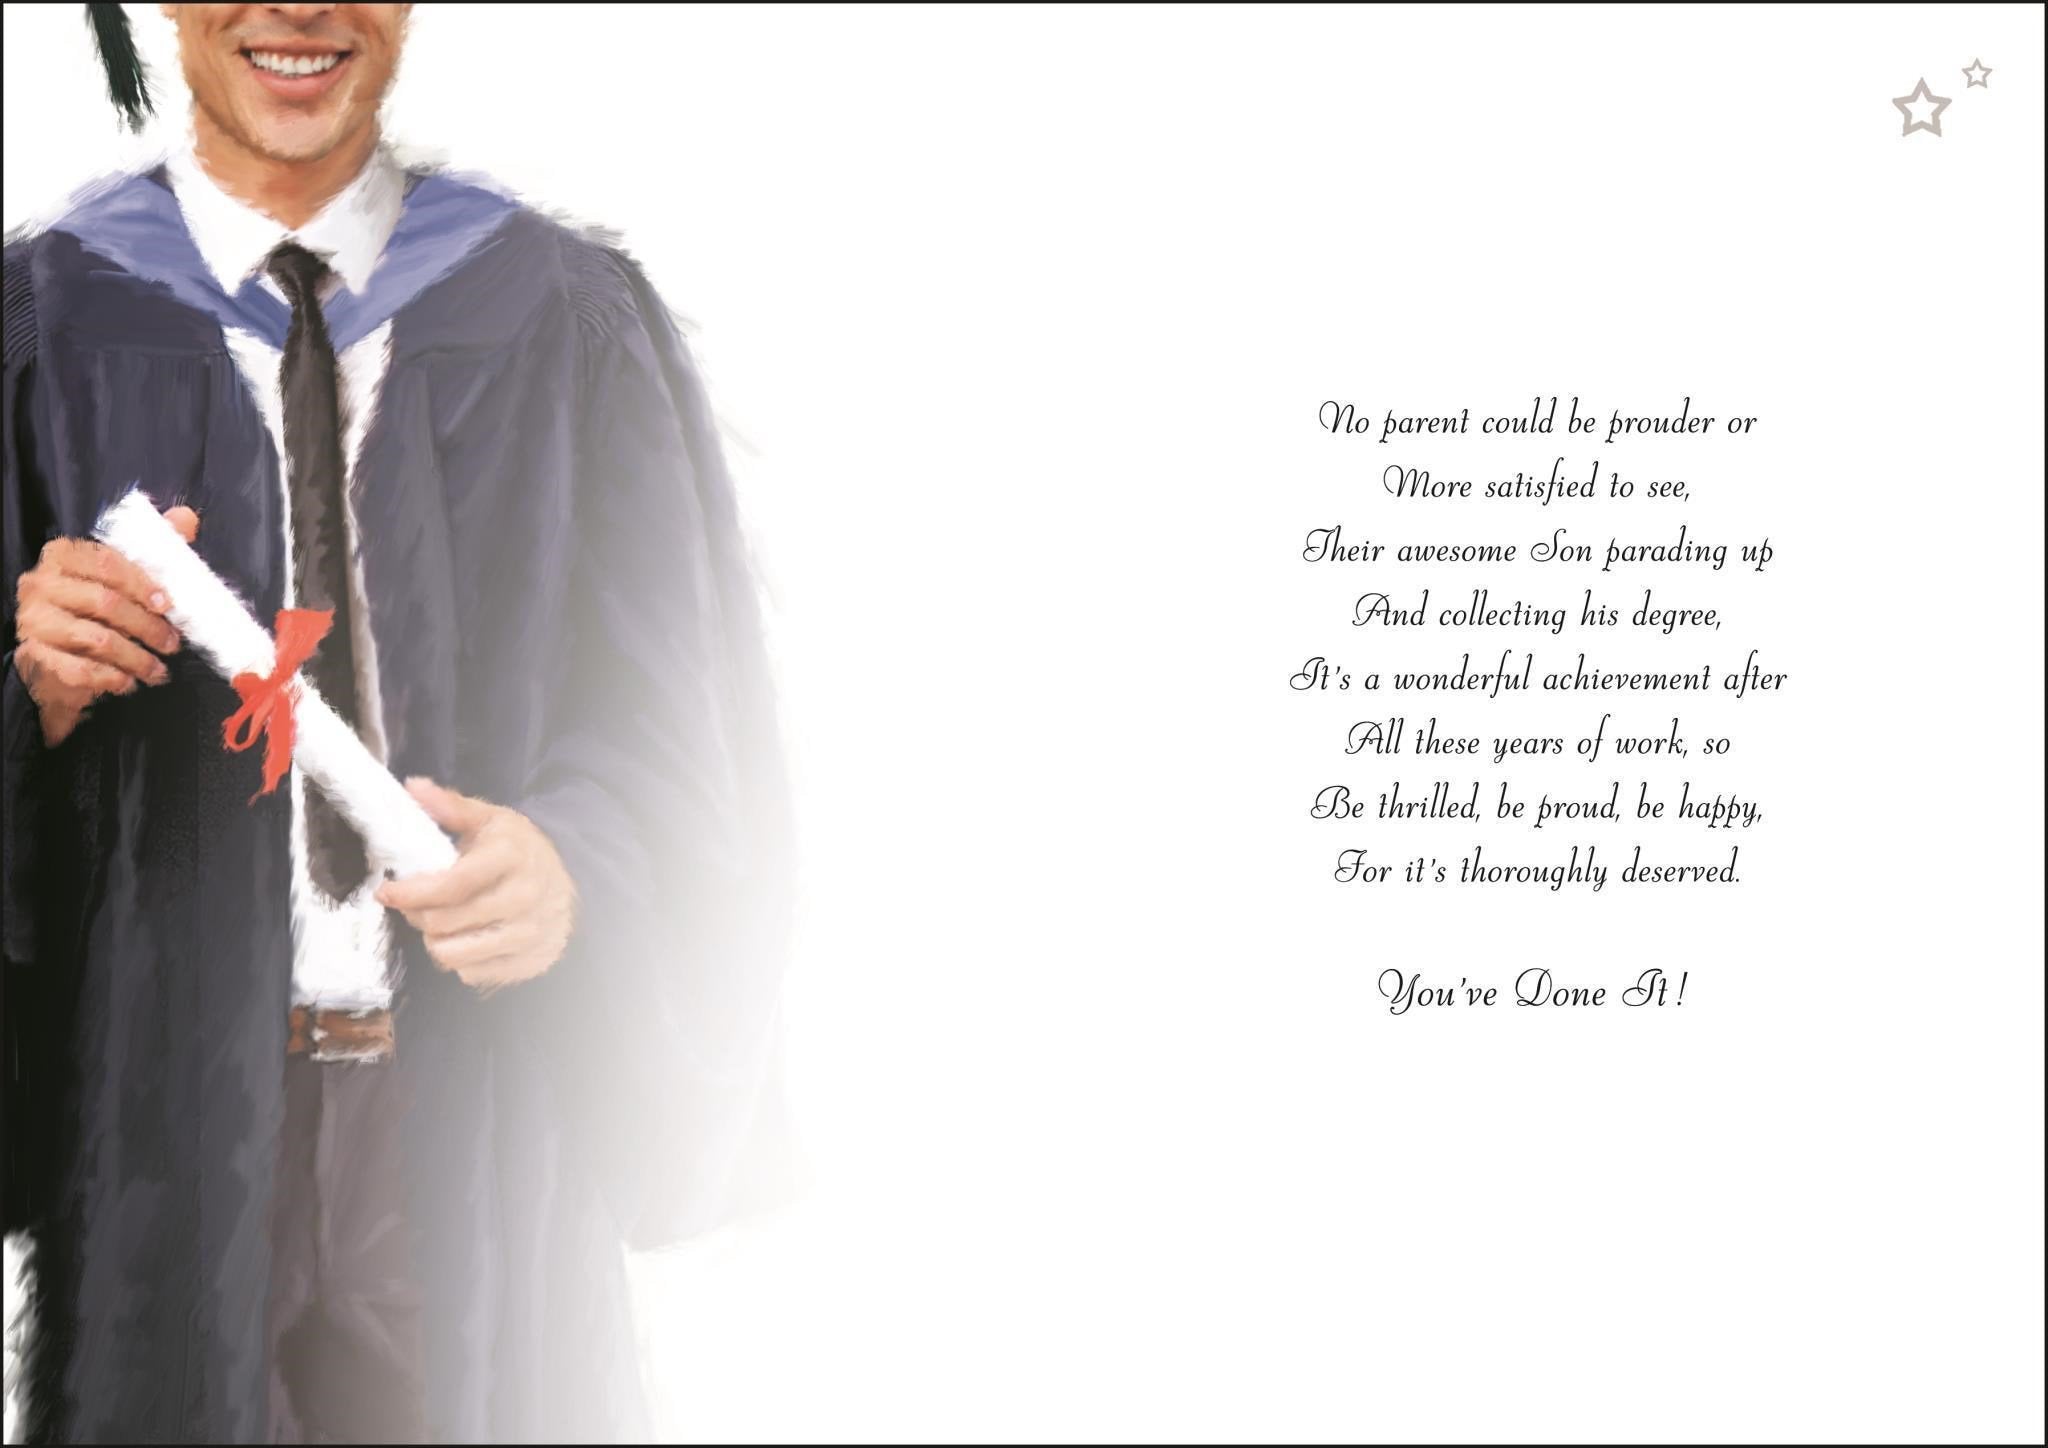 Inside of Graduation of Son Greetings Card